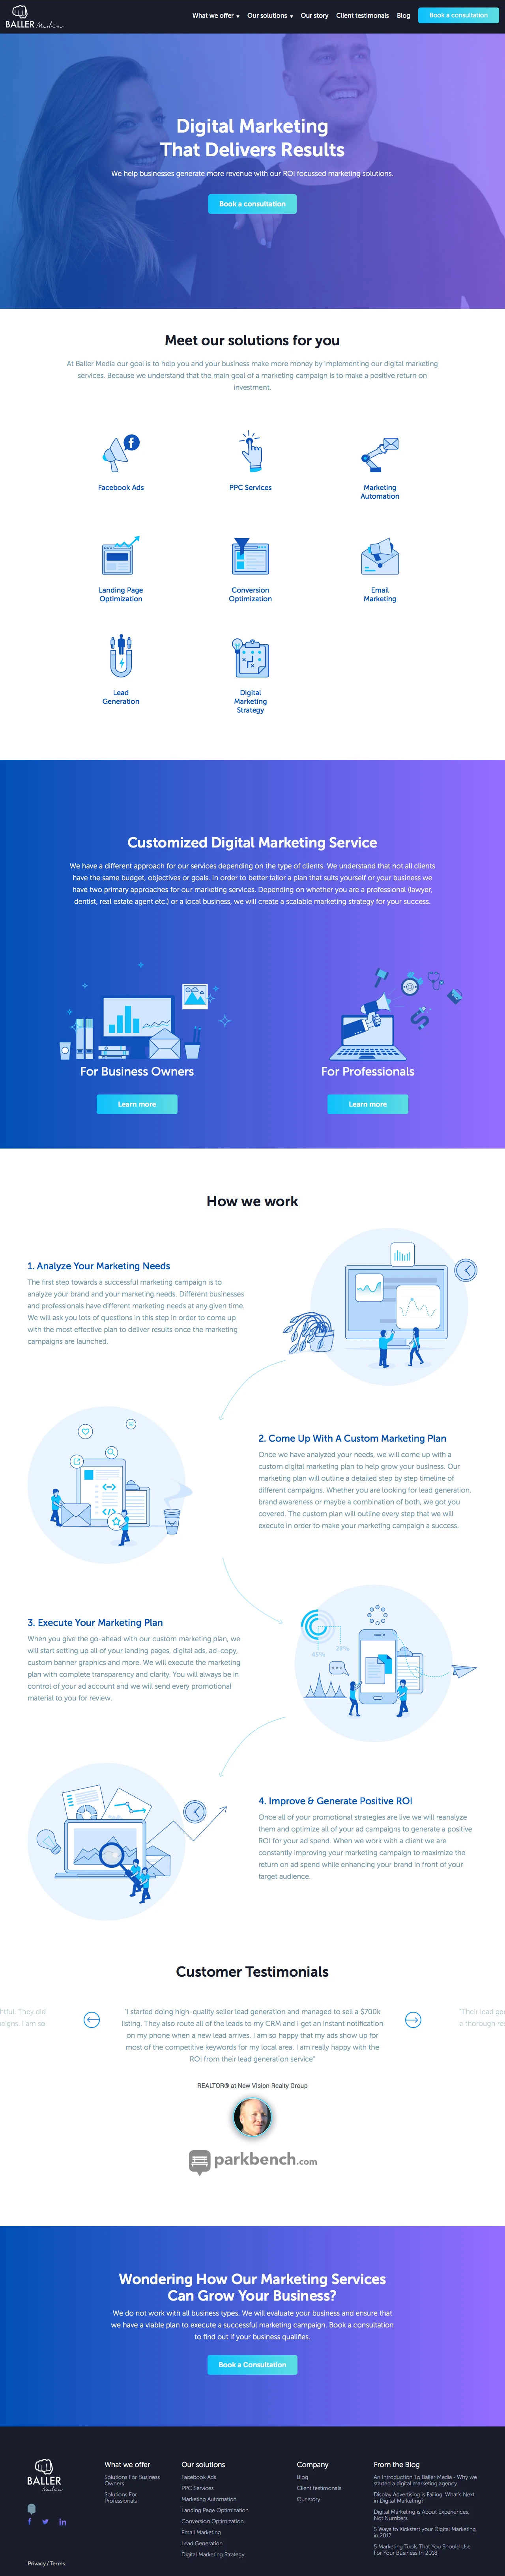 Baller Landing Page Example: Baller marketing is a full-service digital marketing agency and our focus is to build profitable marketing funnels for your business.